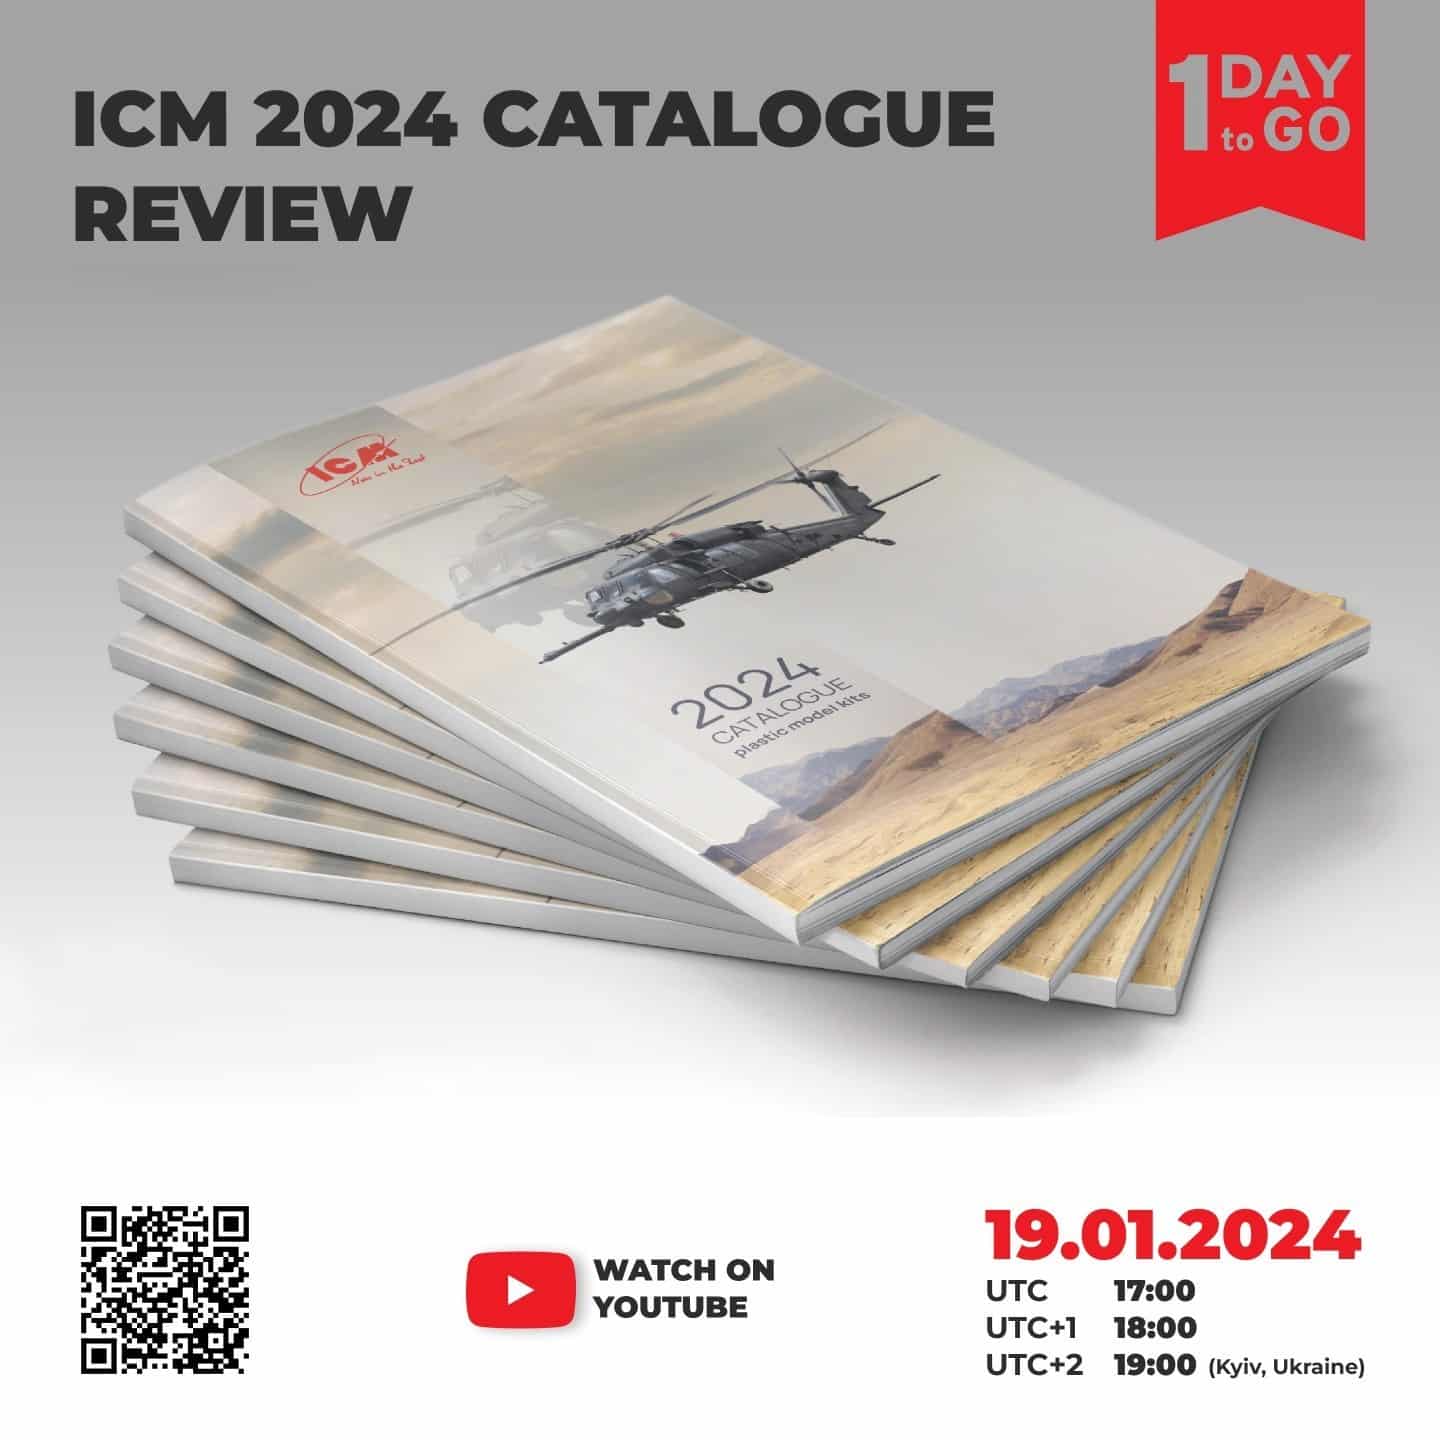 The review of the ICM Catalogue 2024!